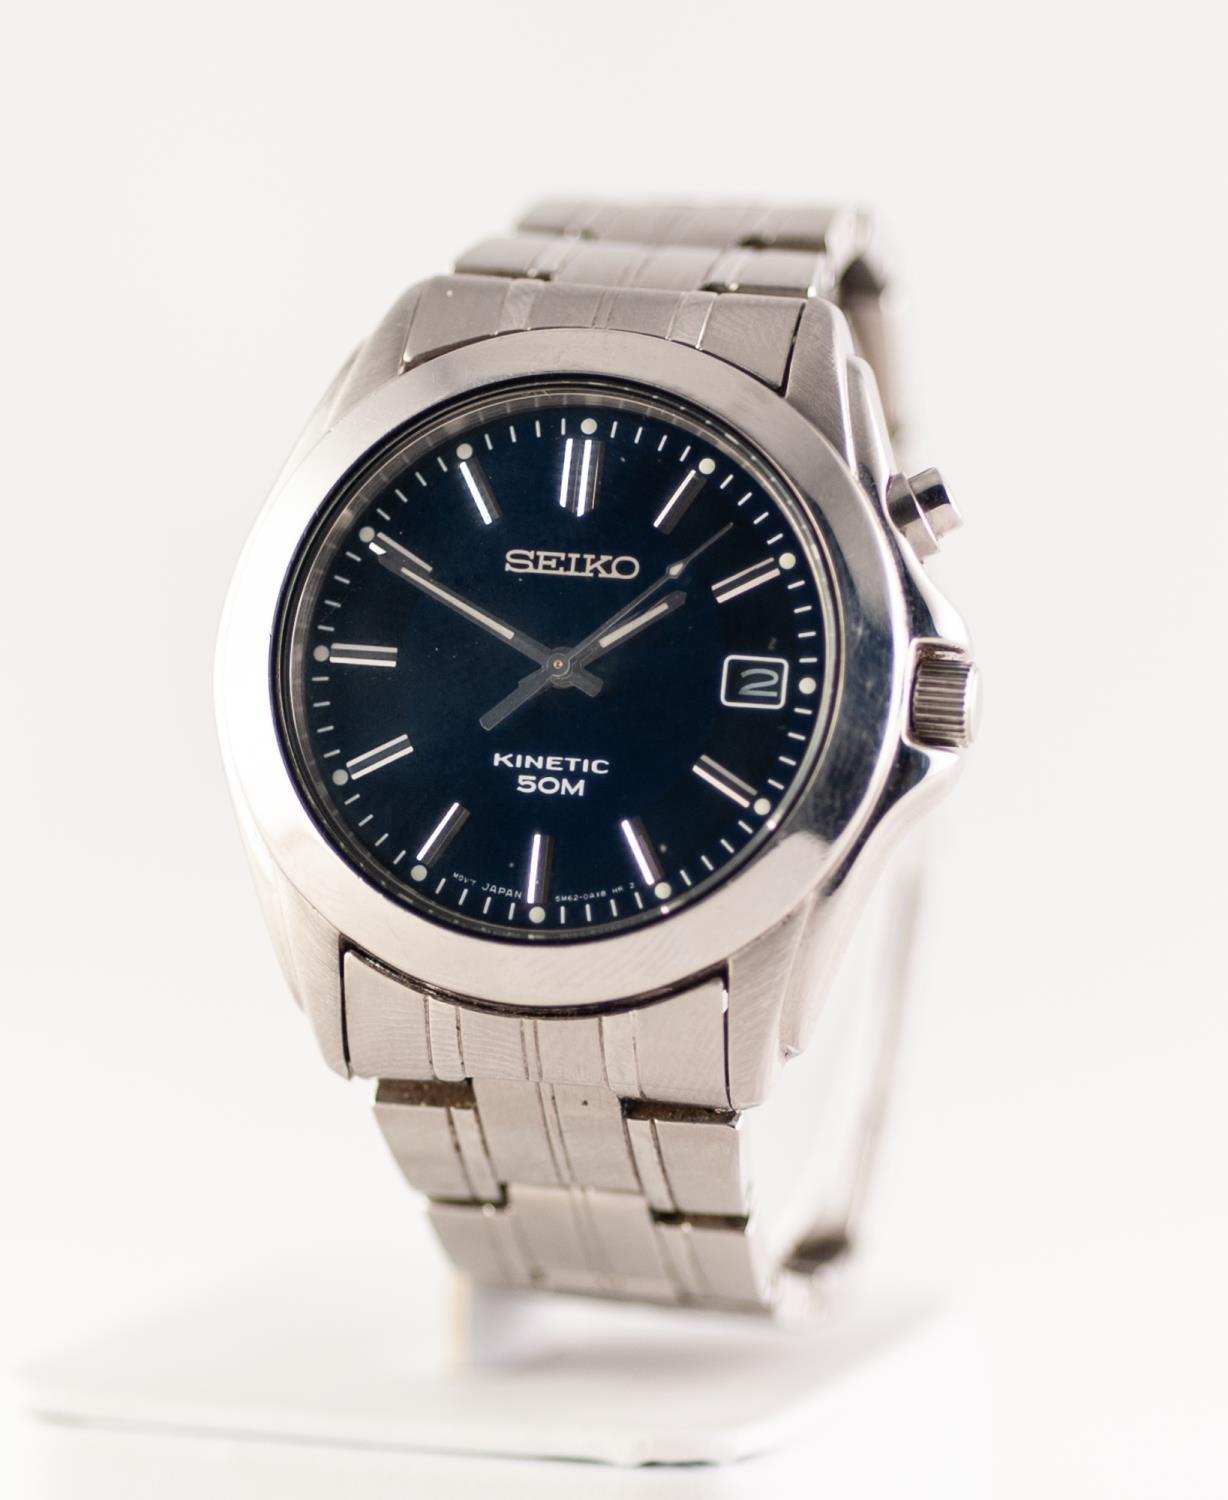 GENTS SEIKO STAINLESS STEEL WRIST WATCH with KINETIC automatic movements, with one button black dial